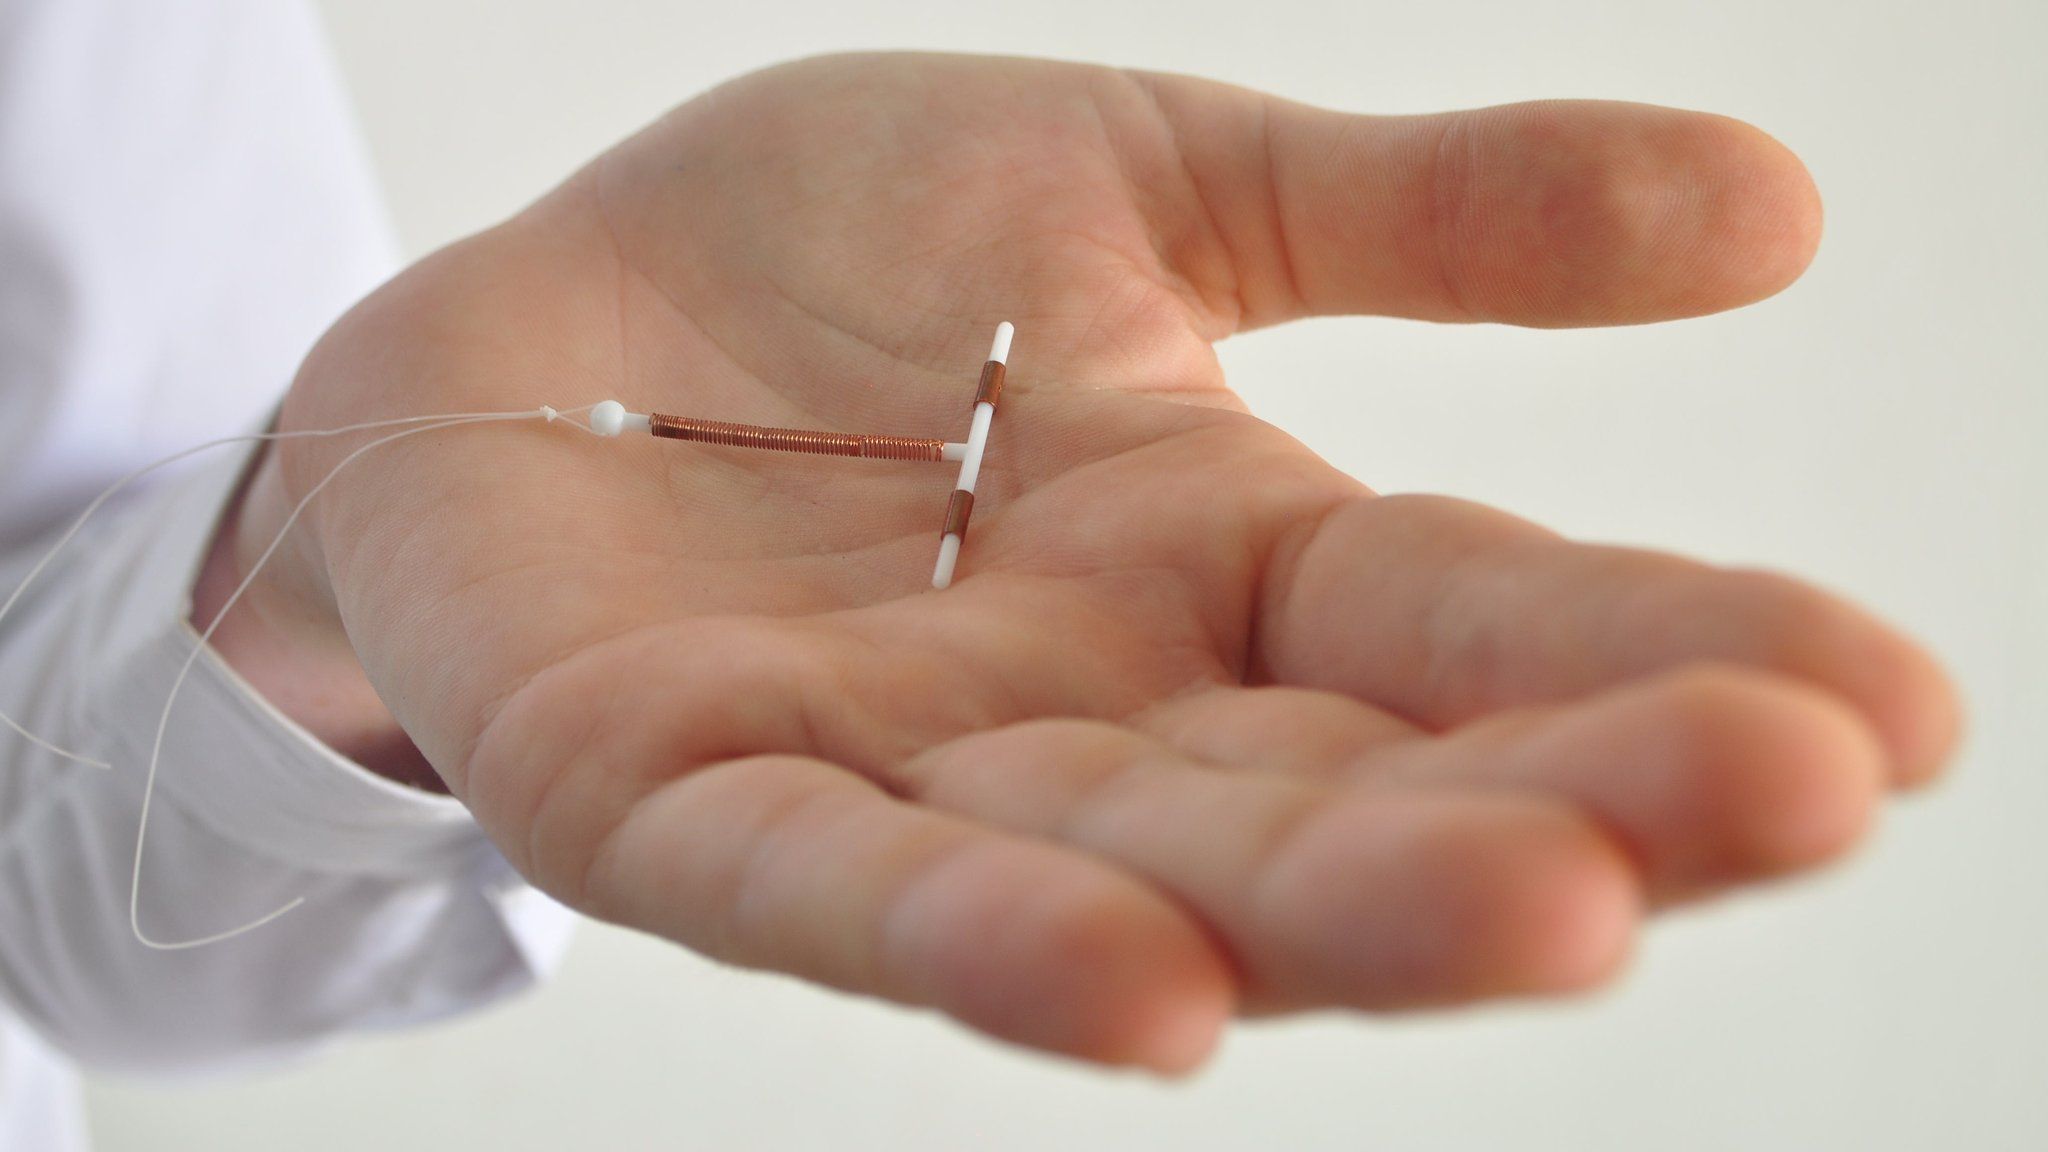 An intrauterine contraceptive device, also known as a coil